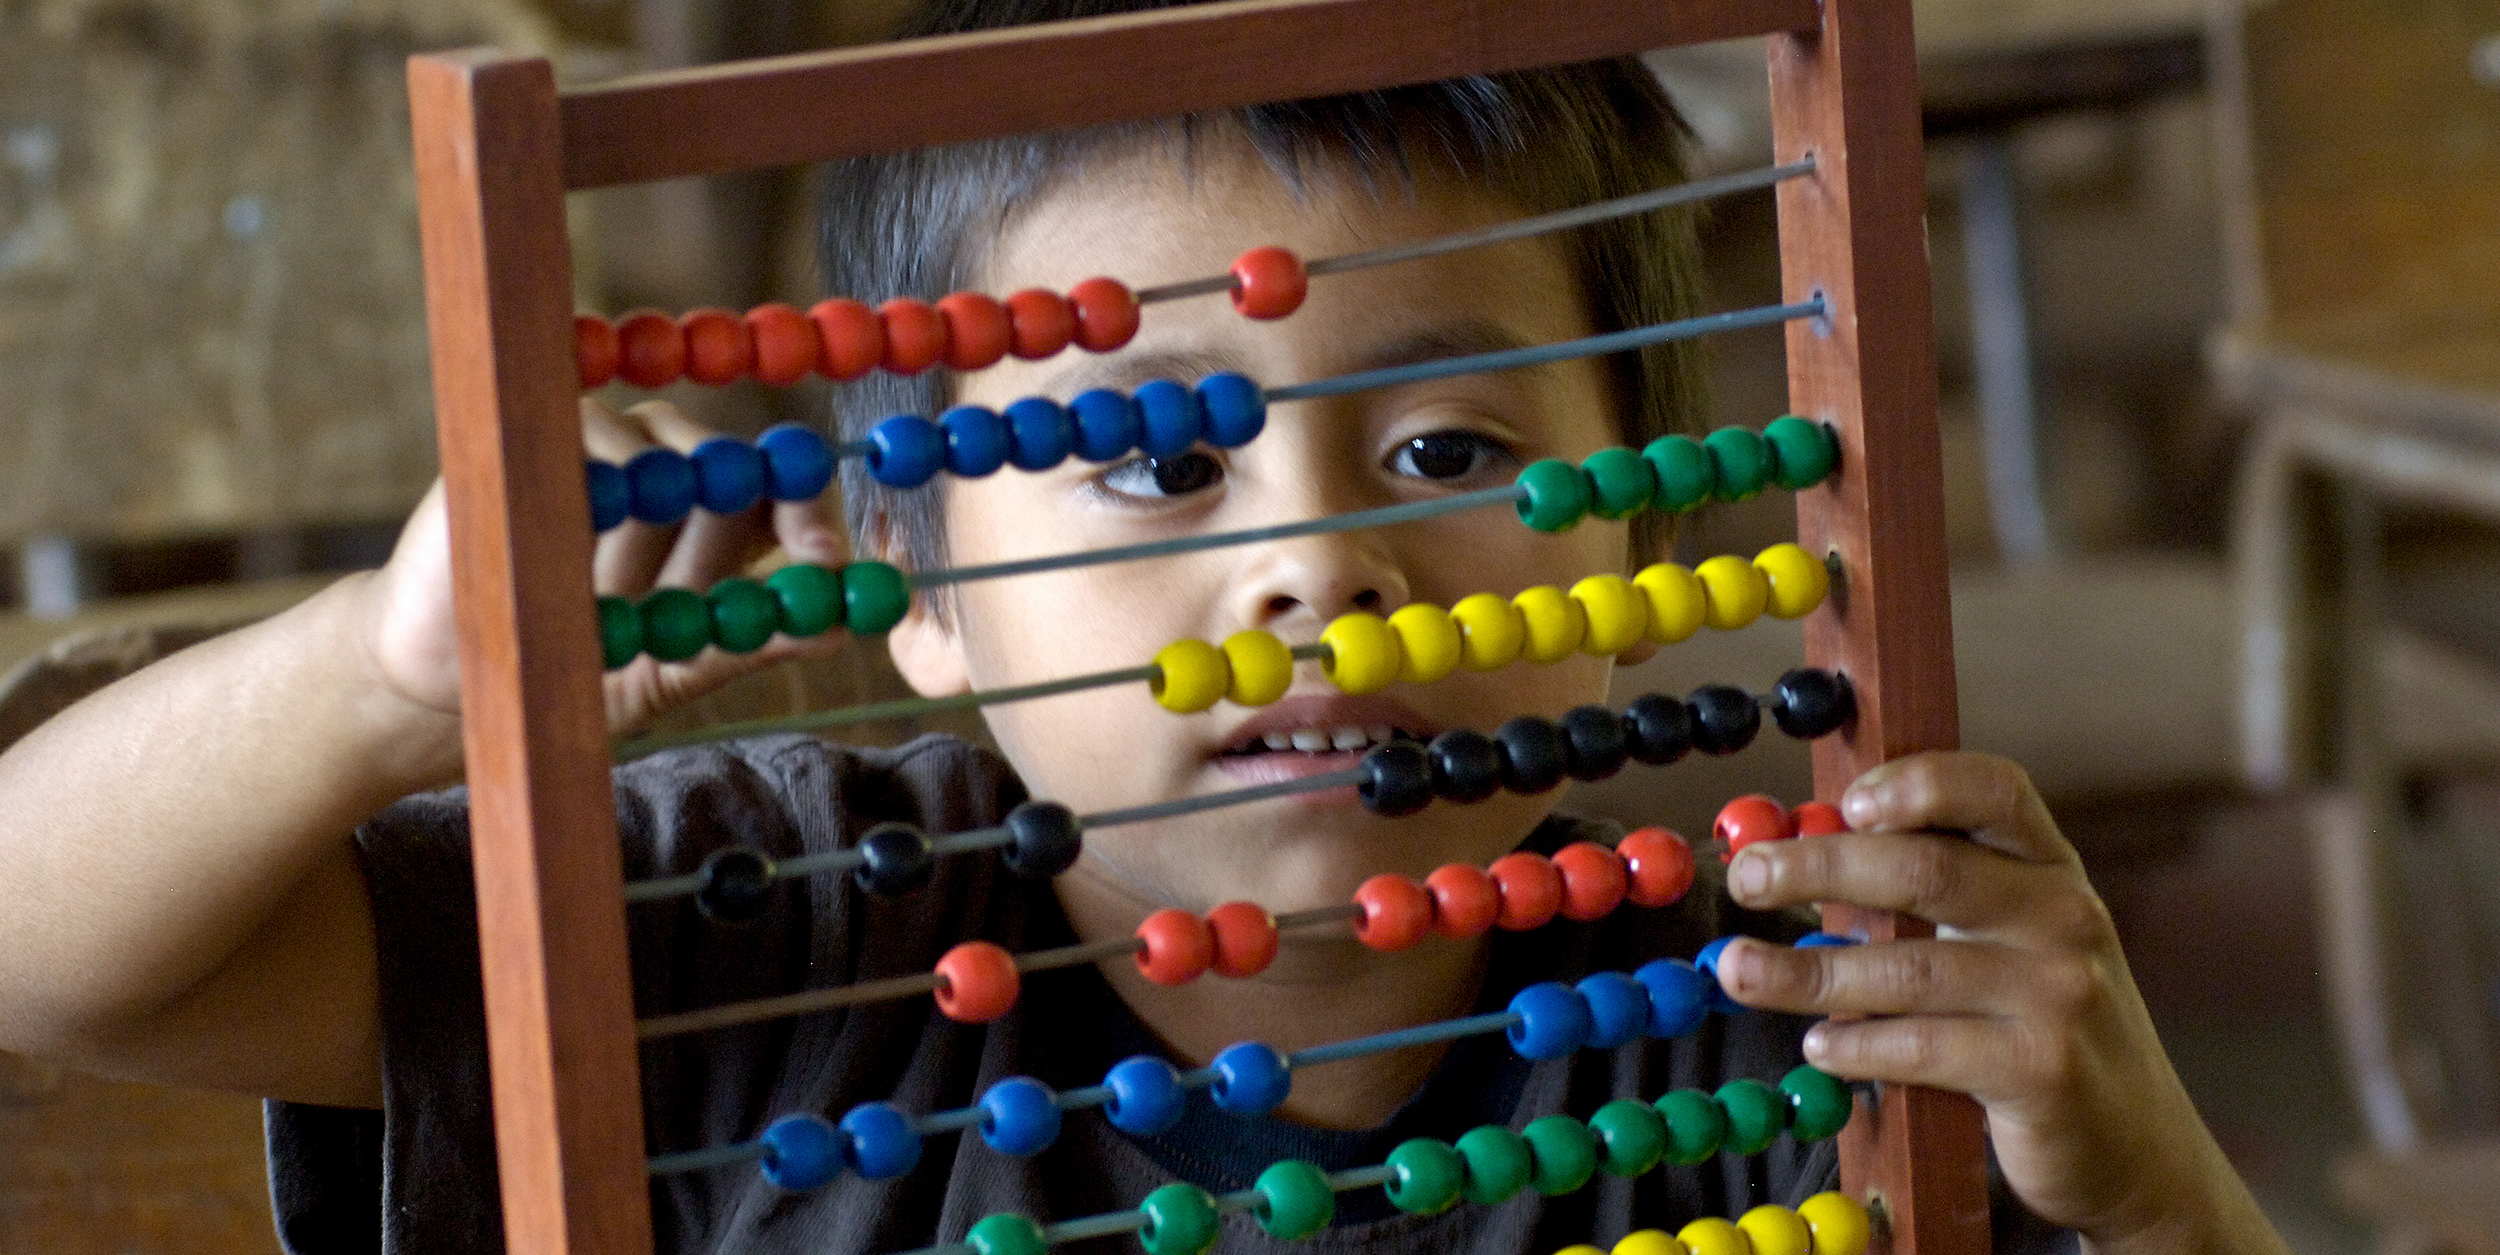 A young boy plays with an abacus.